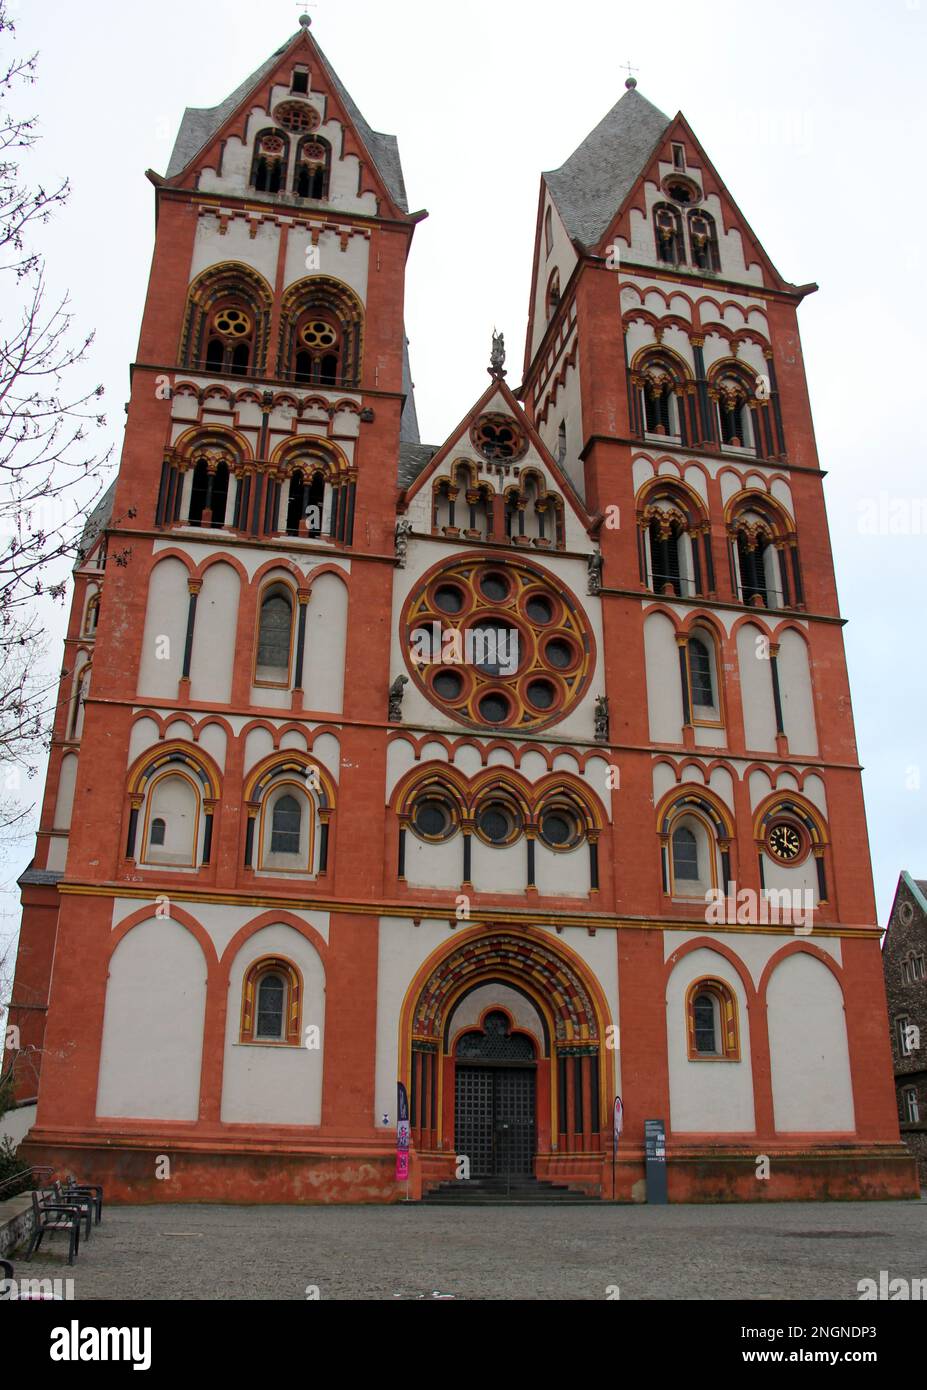 Limburg Cathedral, aka Georgsdom, Romanesque-Gothic transitional style dating back to 11th century, Limburg an der Lahn, Germany Stock Photo